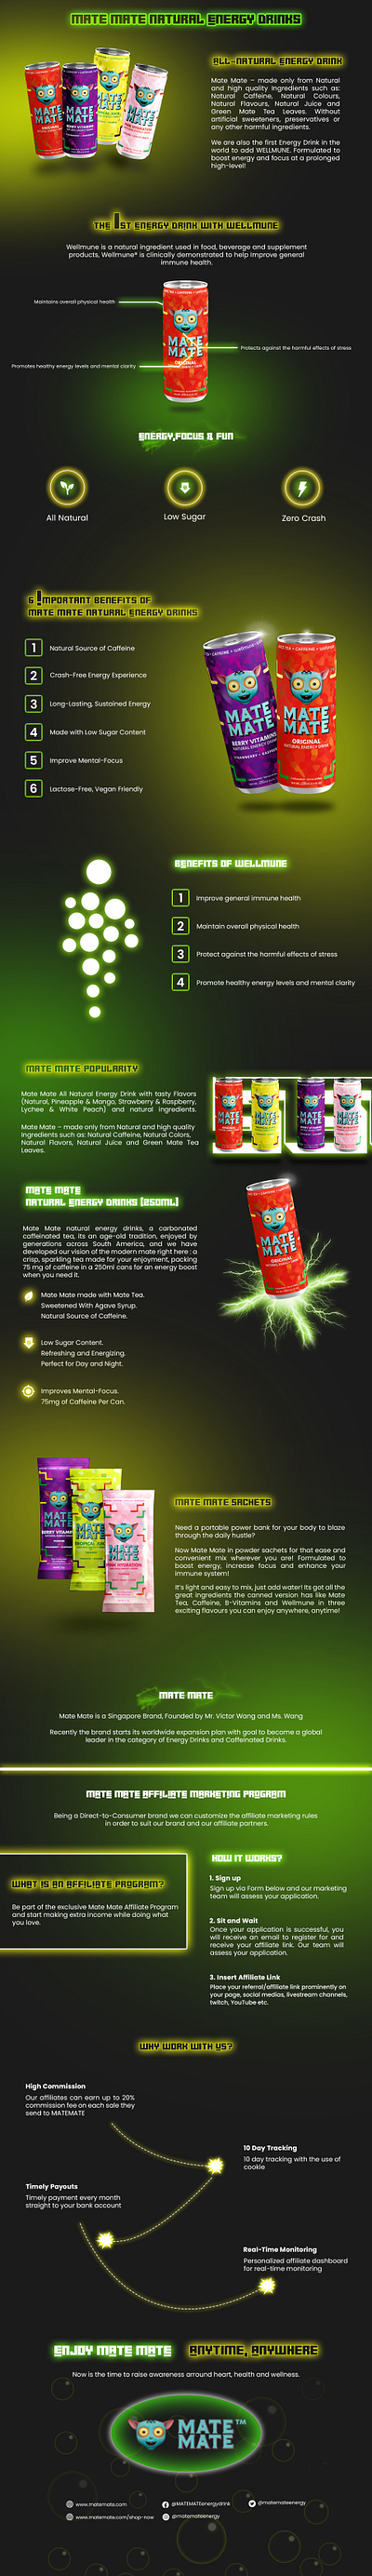 Energy drink infographic cold drink infographic cold drinks design drinks energy drink energy drinks graphic art graphic design graphics infographic infographics photoshop photoshop art photoshop graphics product infographic product infographics